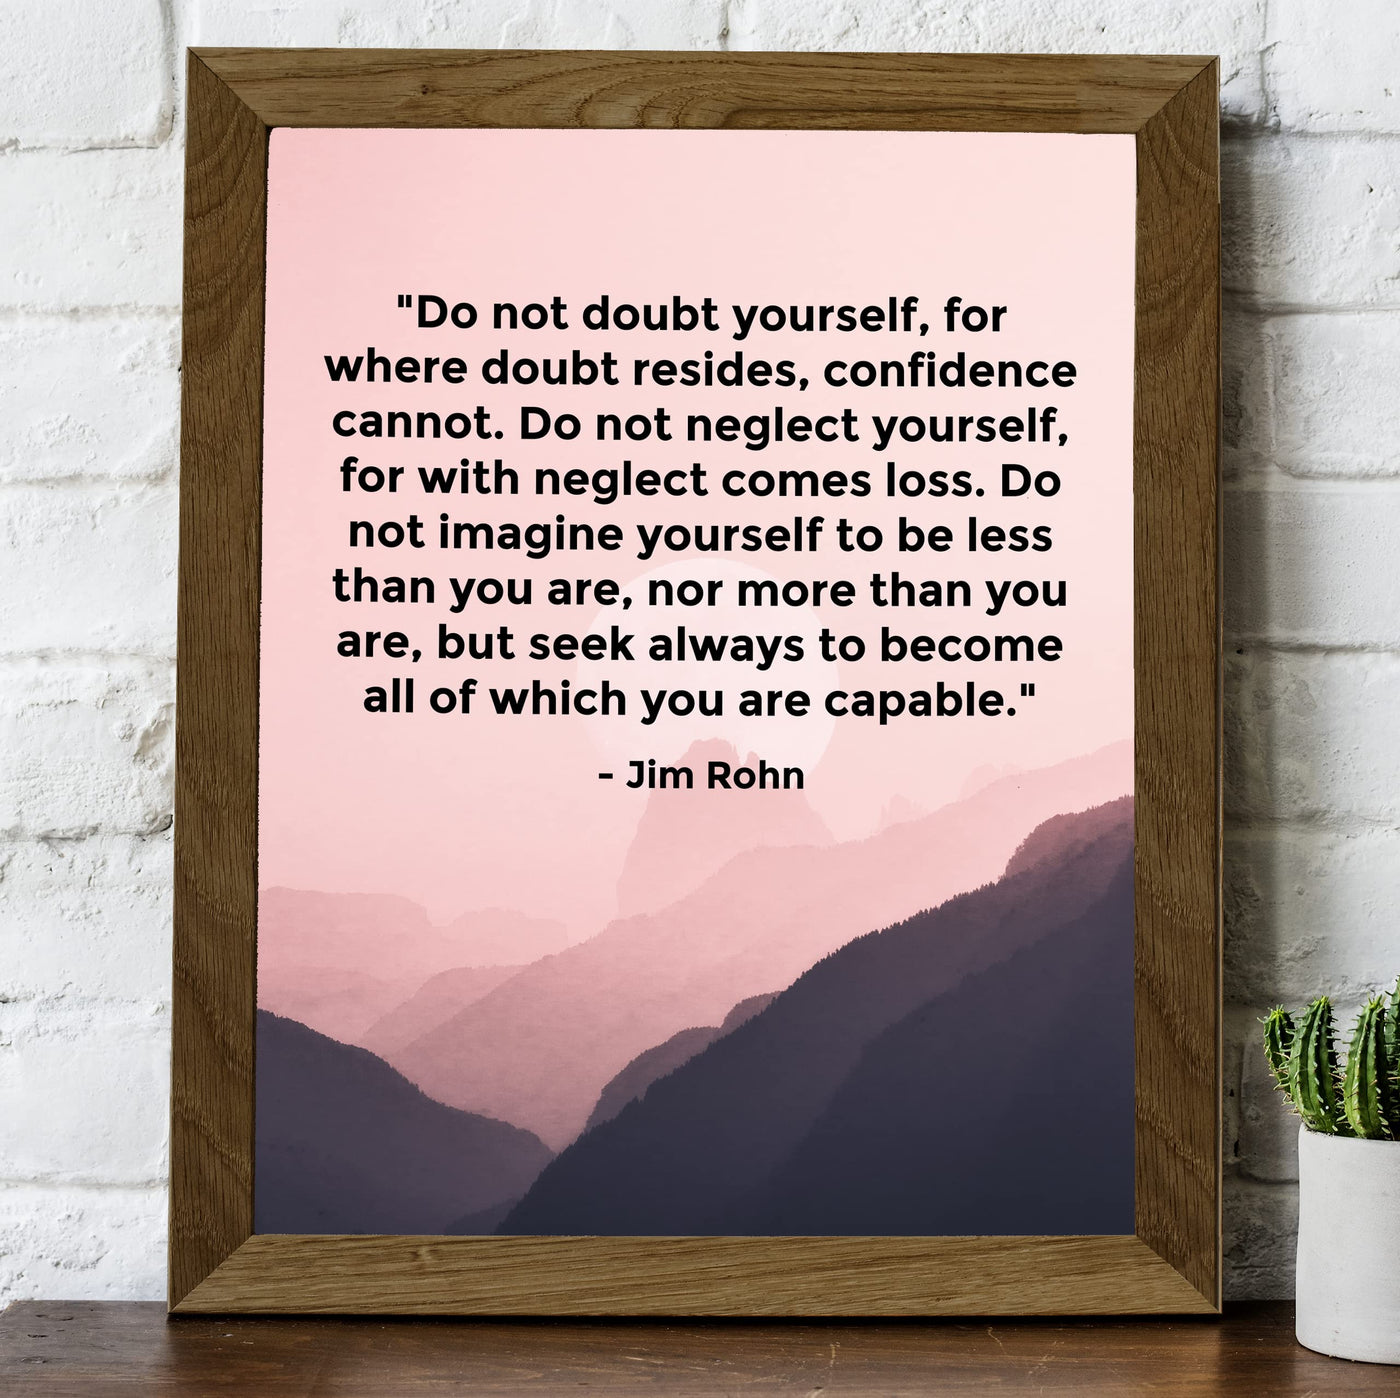 Do Not Doubt Yourself-Seek To Become All-Jim Rohn Motivational Quotes Wall Art-8 x 10" Inspirational Mountain Photo Print-Ready to Frame. Modern Home-School-Office Decor. Great Gift of Motivation!